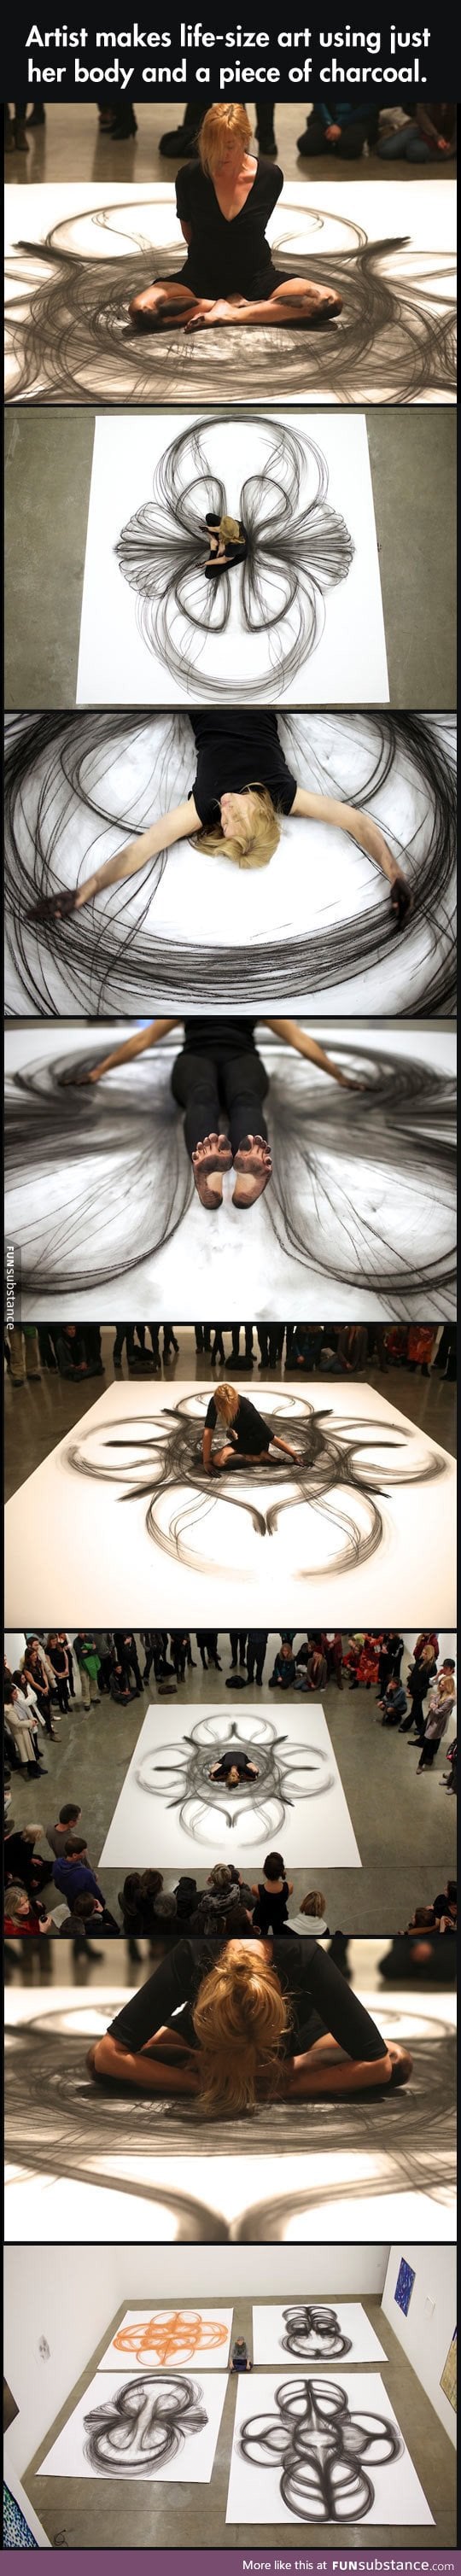 Artist uses her body and a piece of charcoal to create this